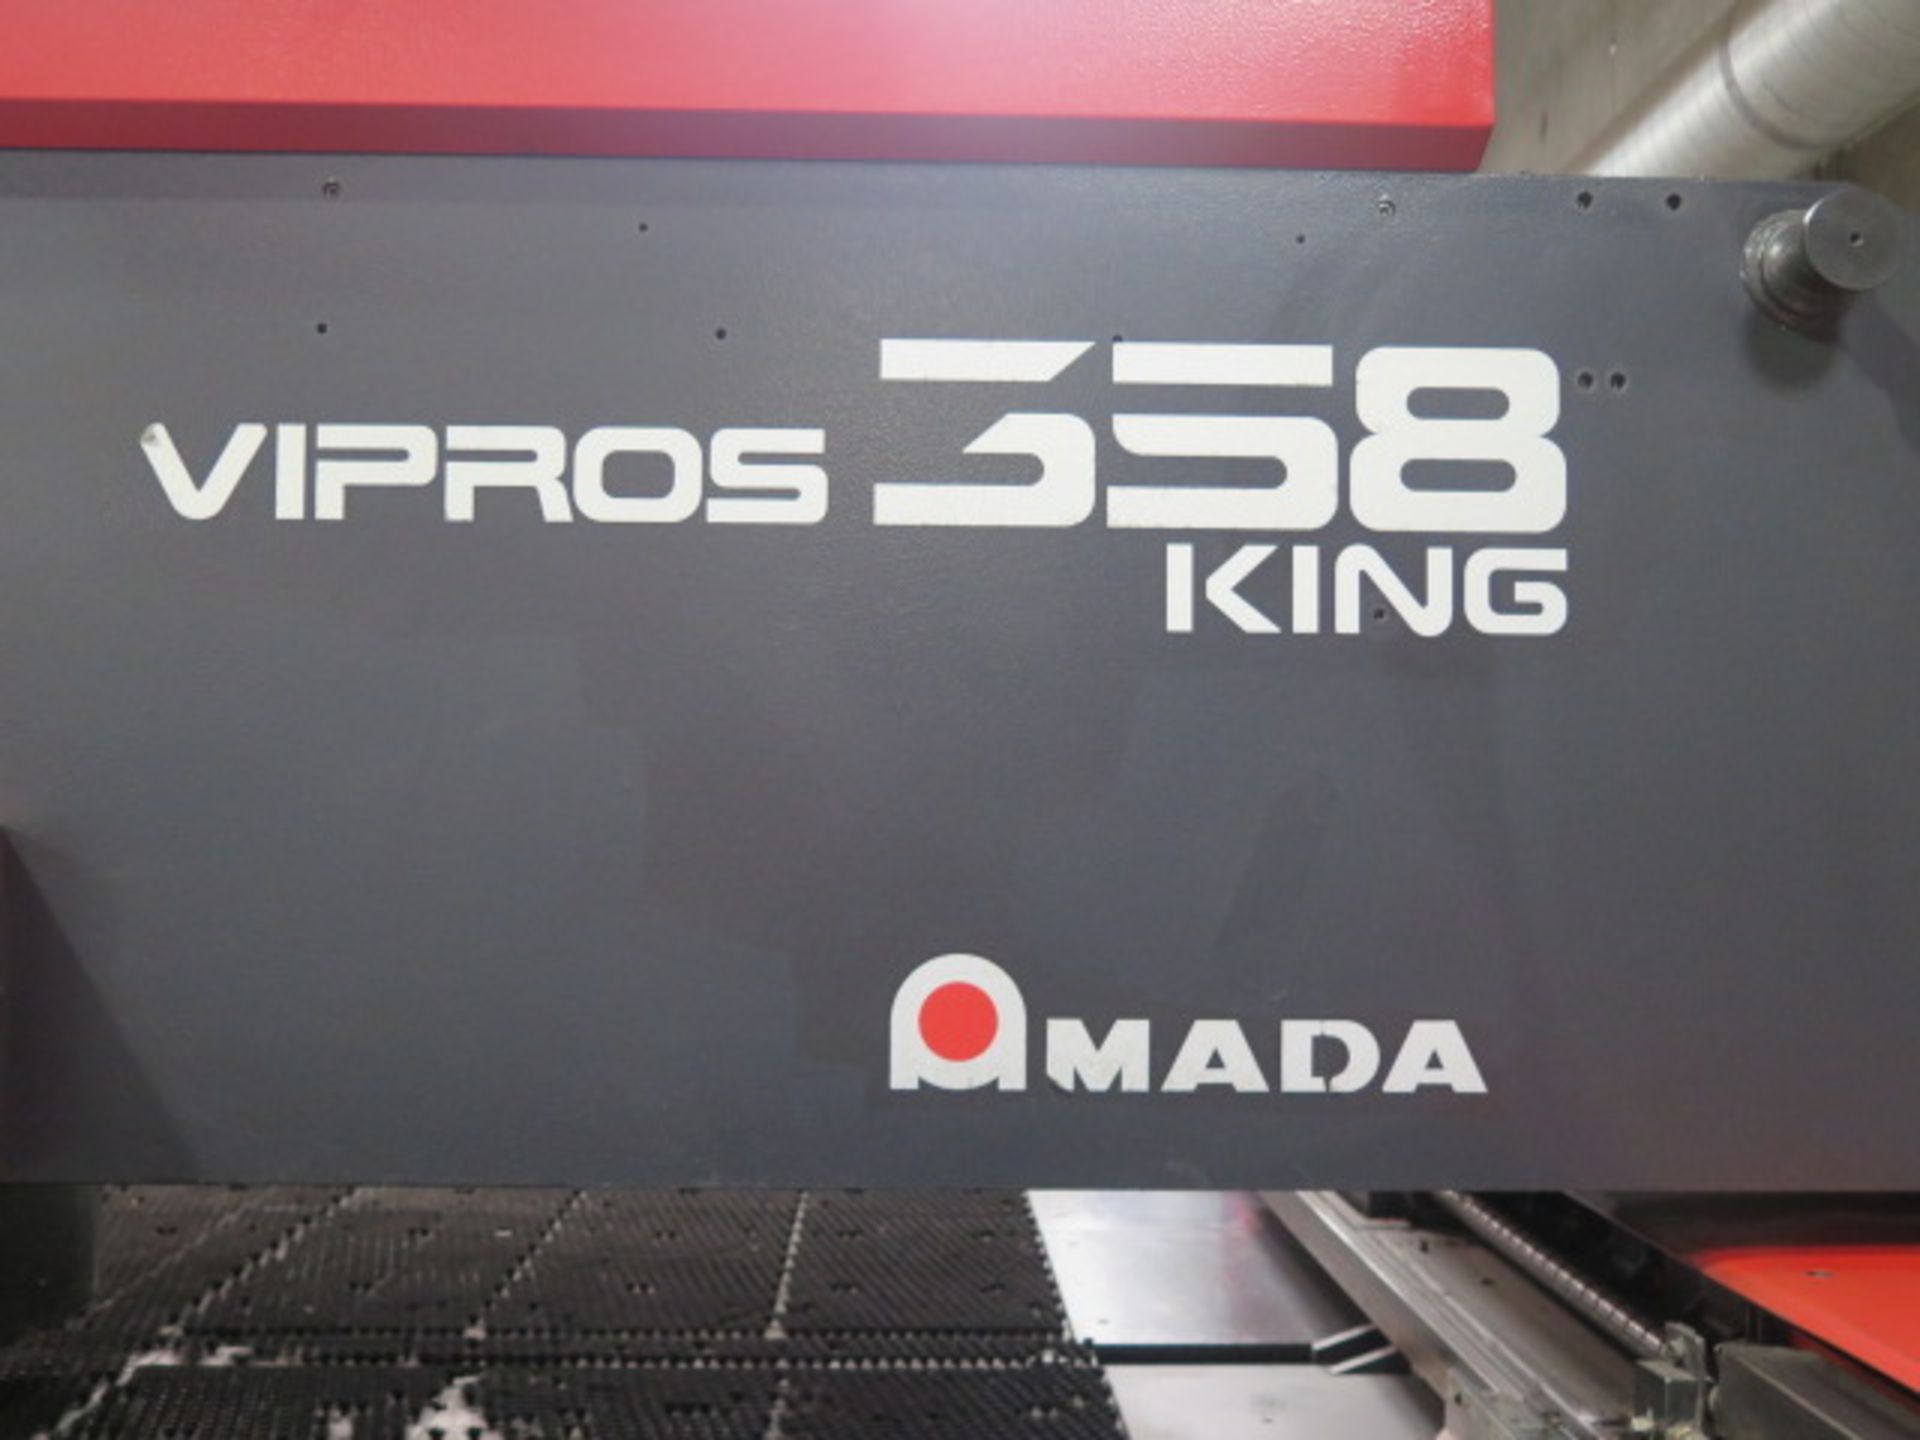 1998 Amada VIPROS 358 King 30 Ton 58-Station CNC Turret Punch Press s/n 35840011 (Recently Factory - Image 15 of 16